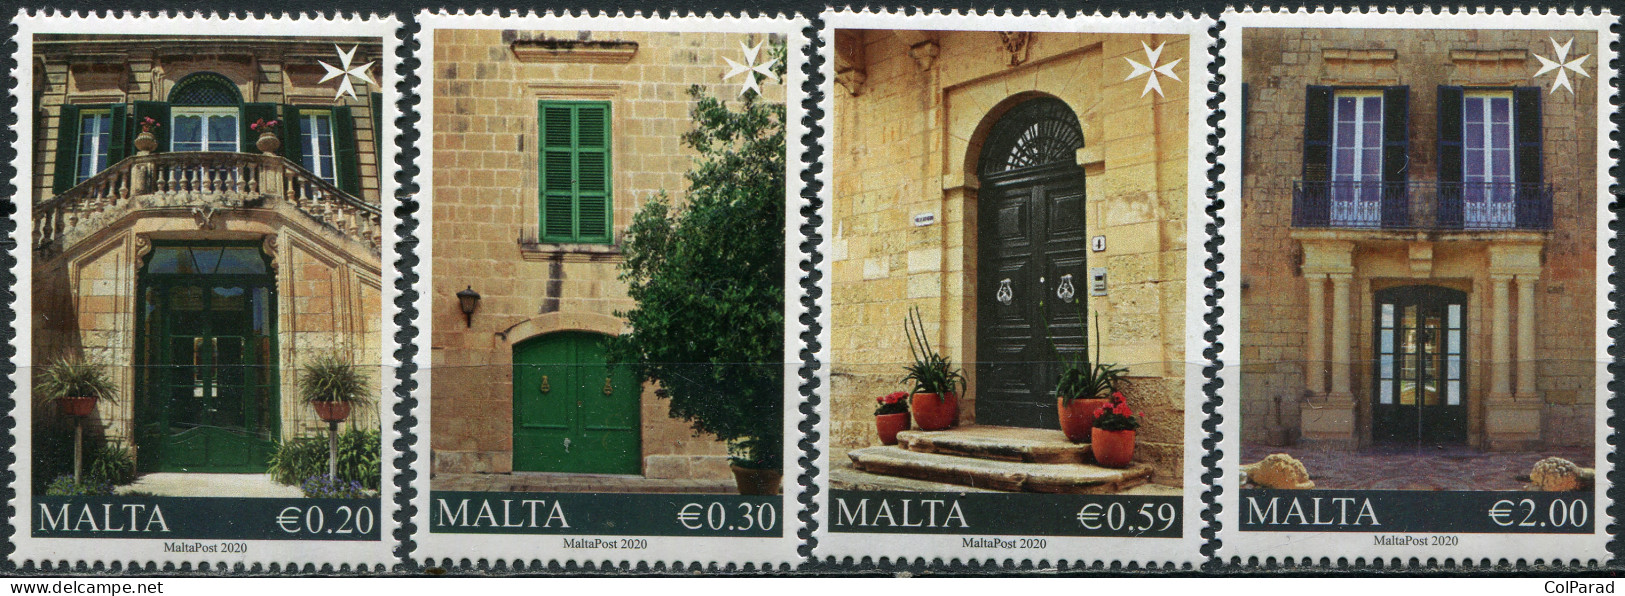 MALTA - 2020 - SET OF 4 STAMPS MNH ** - Old Residential Houses (II) - Malta